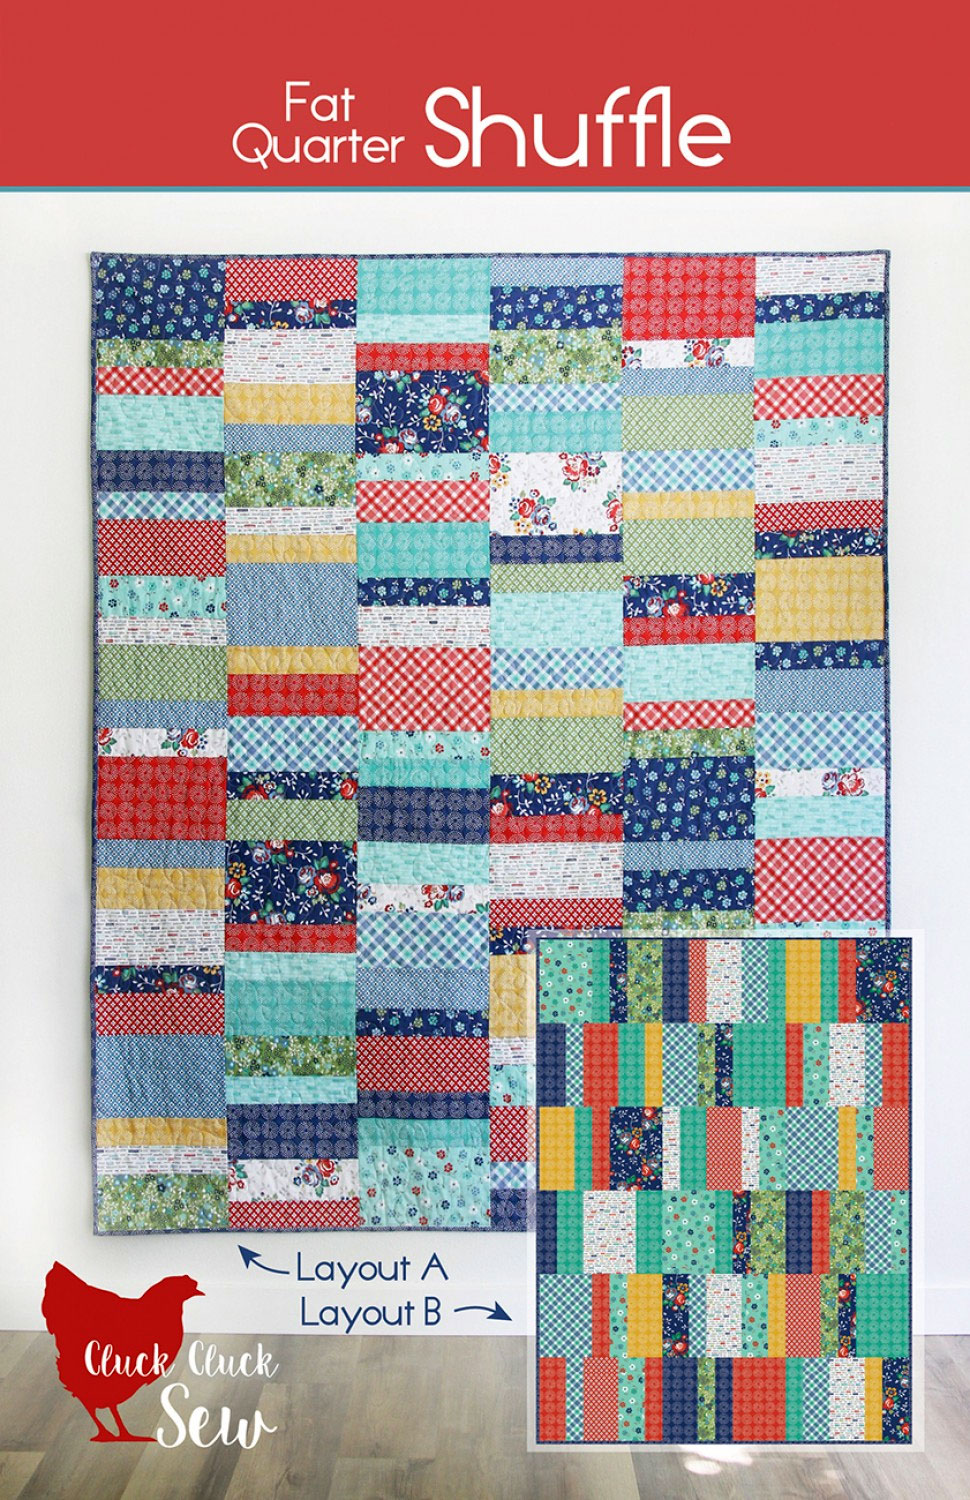 Fat-Quarter-Shuffle-quilt-sewing-pattern-Cluck-Cluck-Sew-front